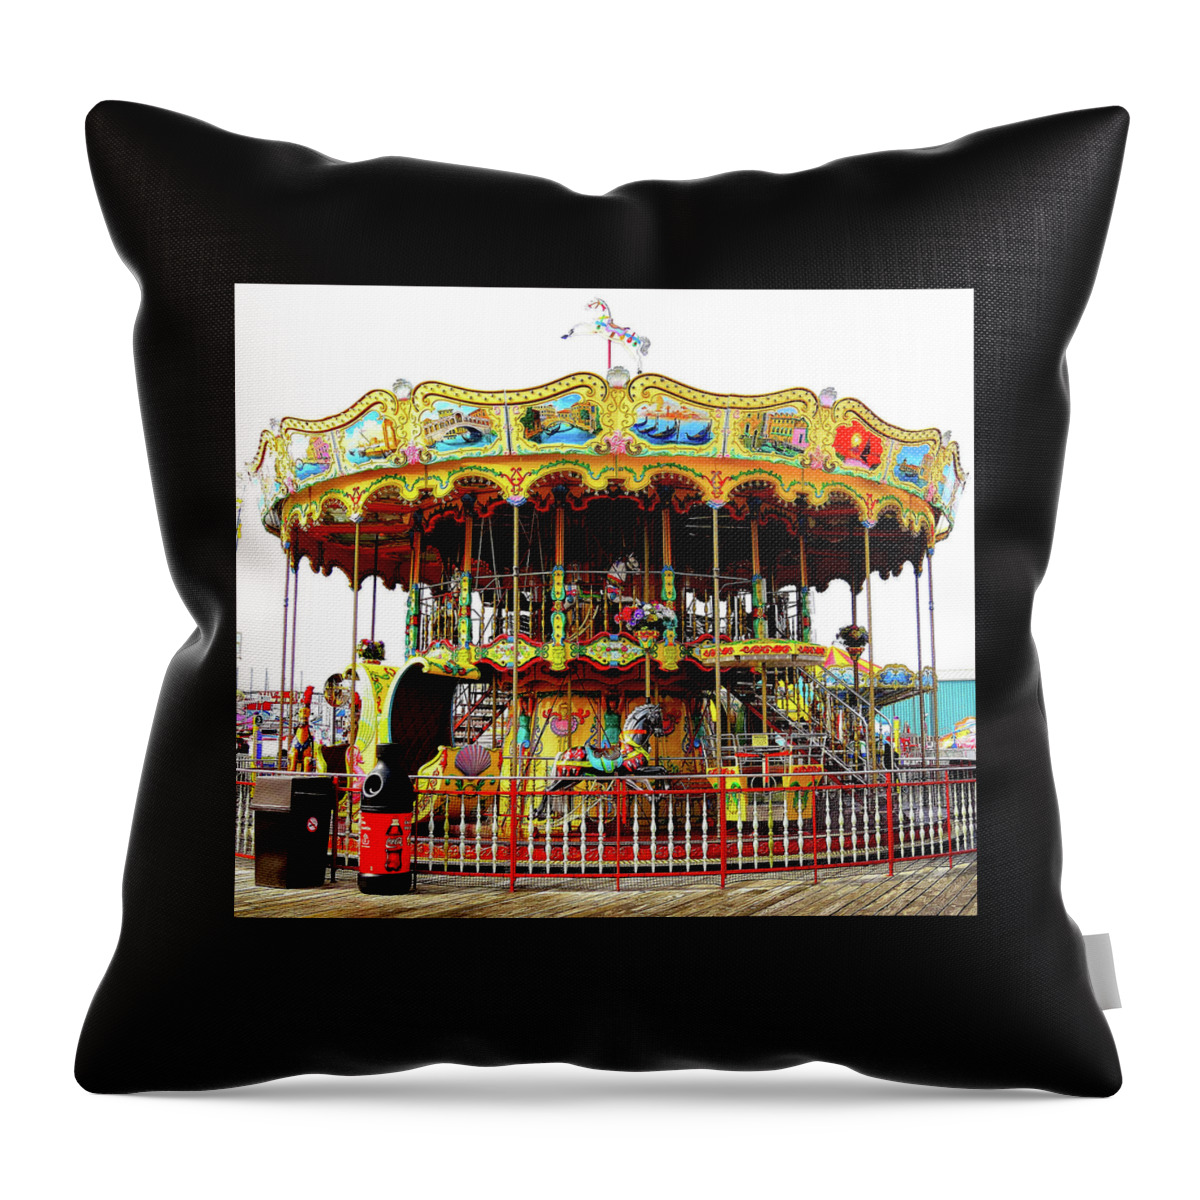 Merry-go-round Throw Pillow featuring the photograph Carousel on the Wildwood, New Jersey Boardwalk by Linda Stern